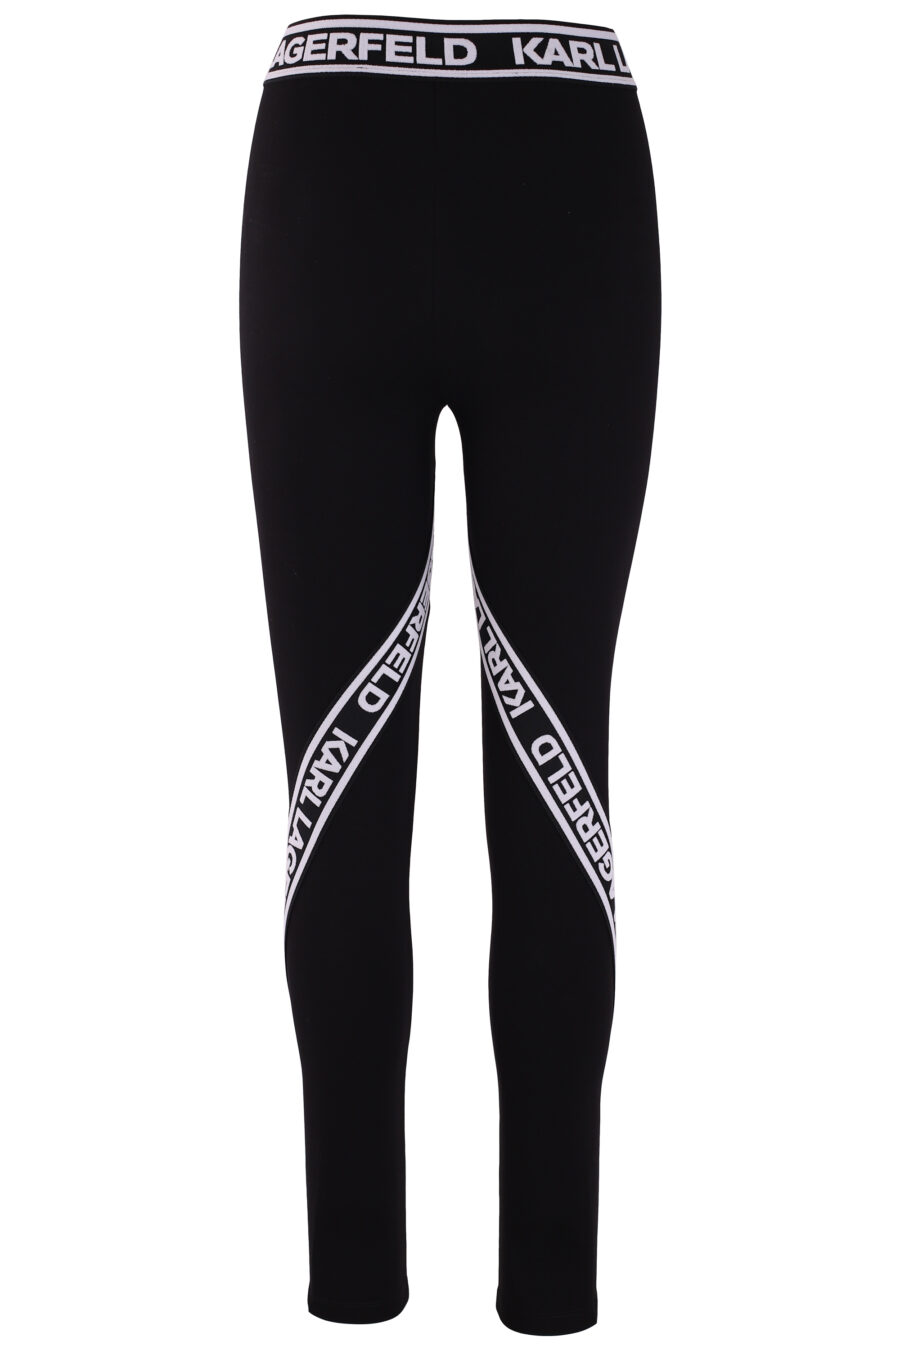 Black leggings with logo tape on the sides - IMG 3719